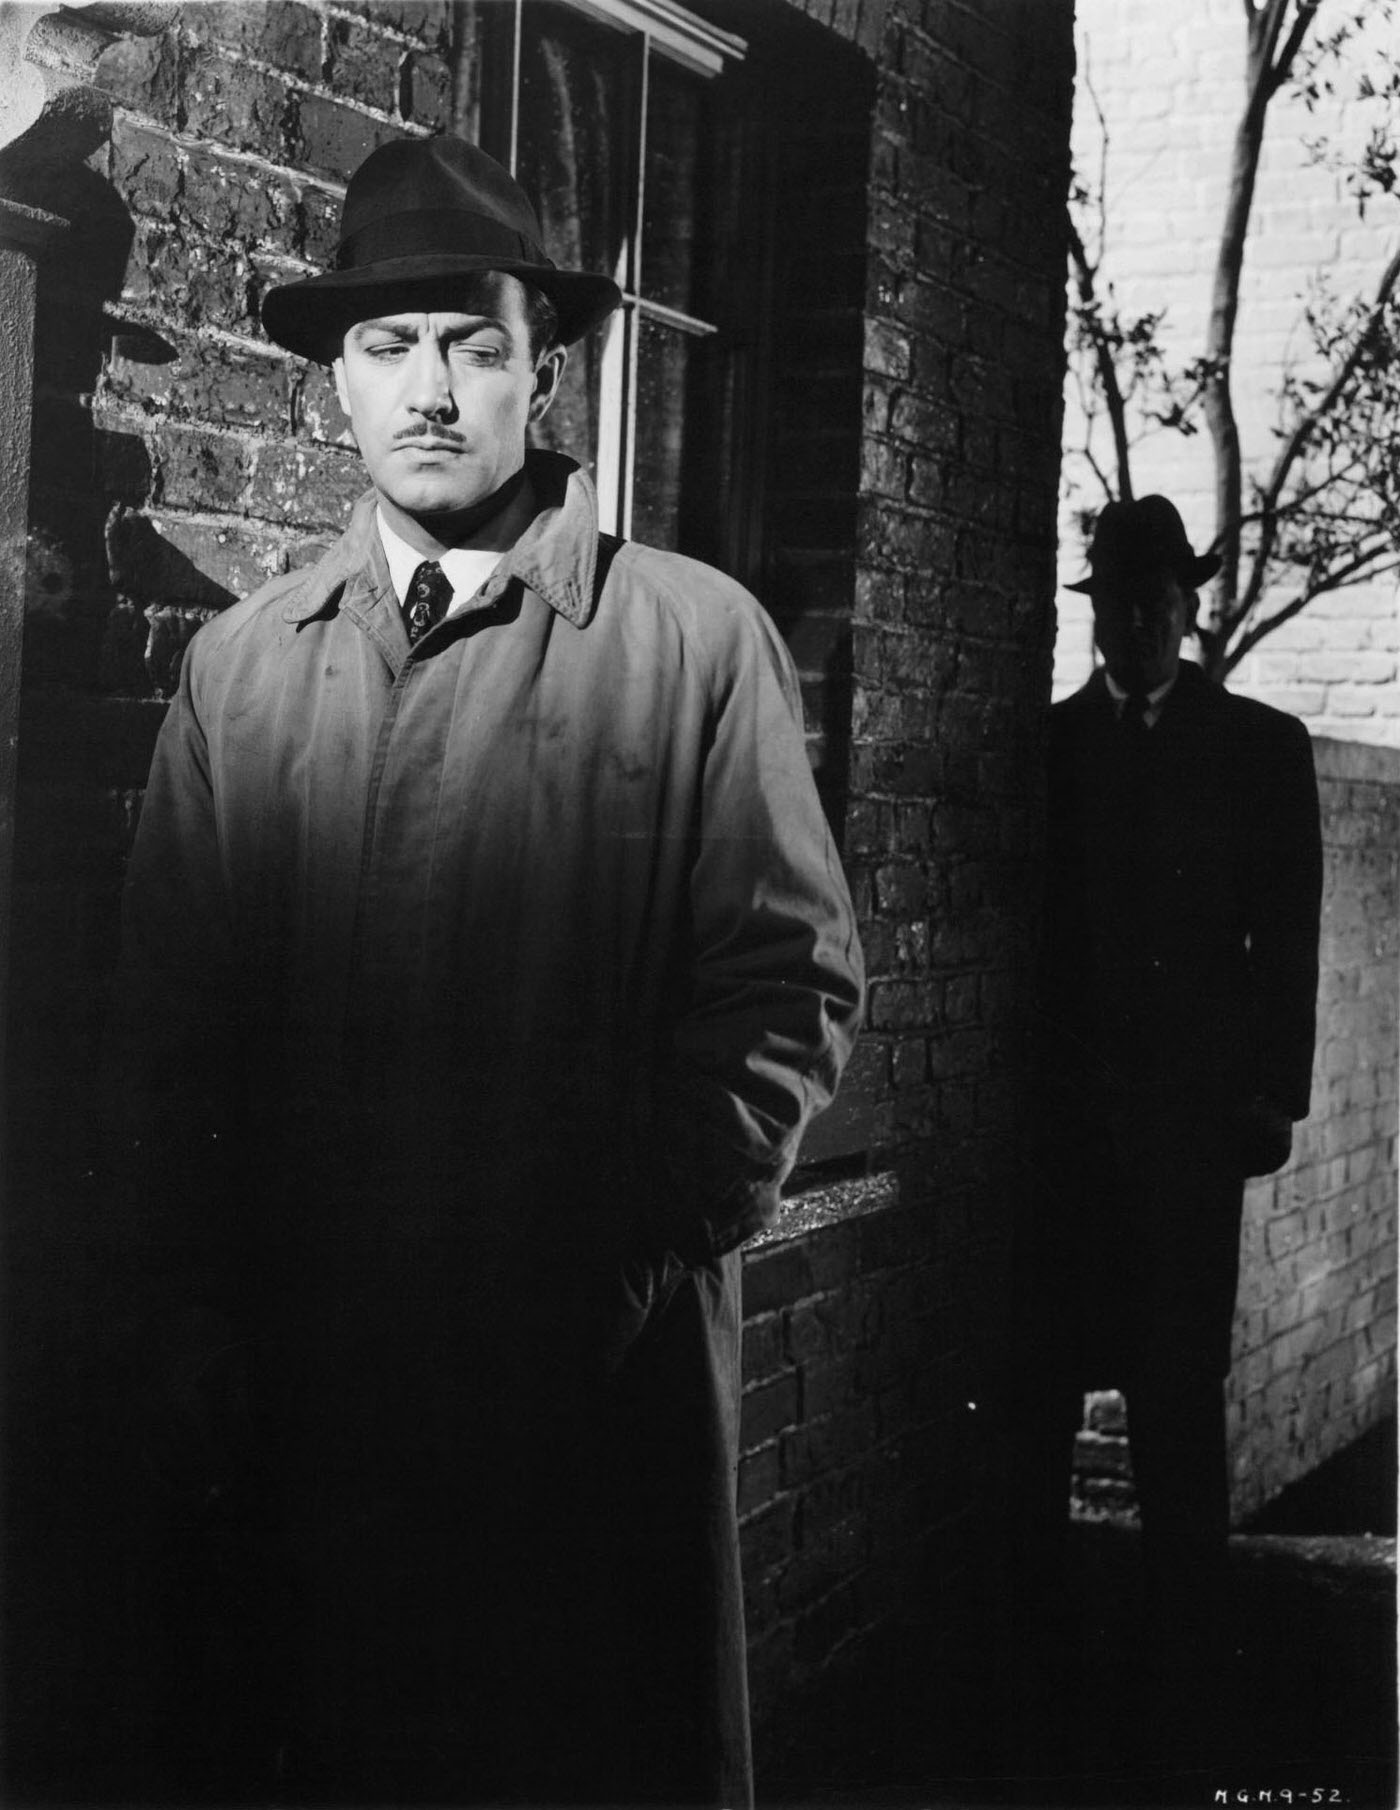 Robert Taylor being followed by a shadowy figure in a scene from the film 'Conspirator', 1949.